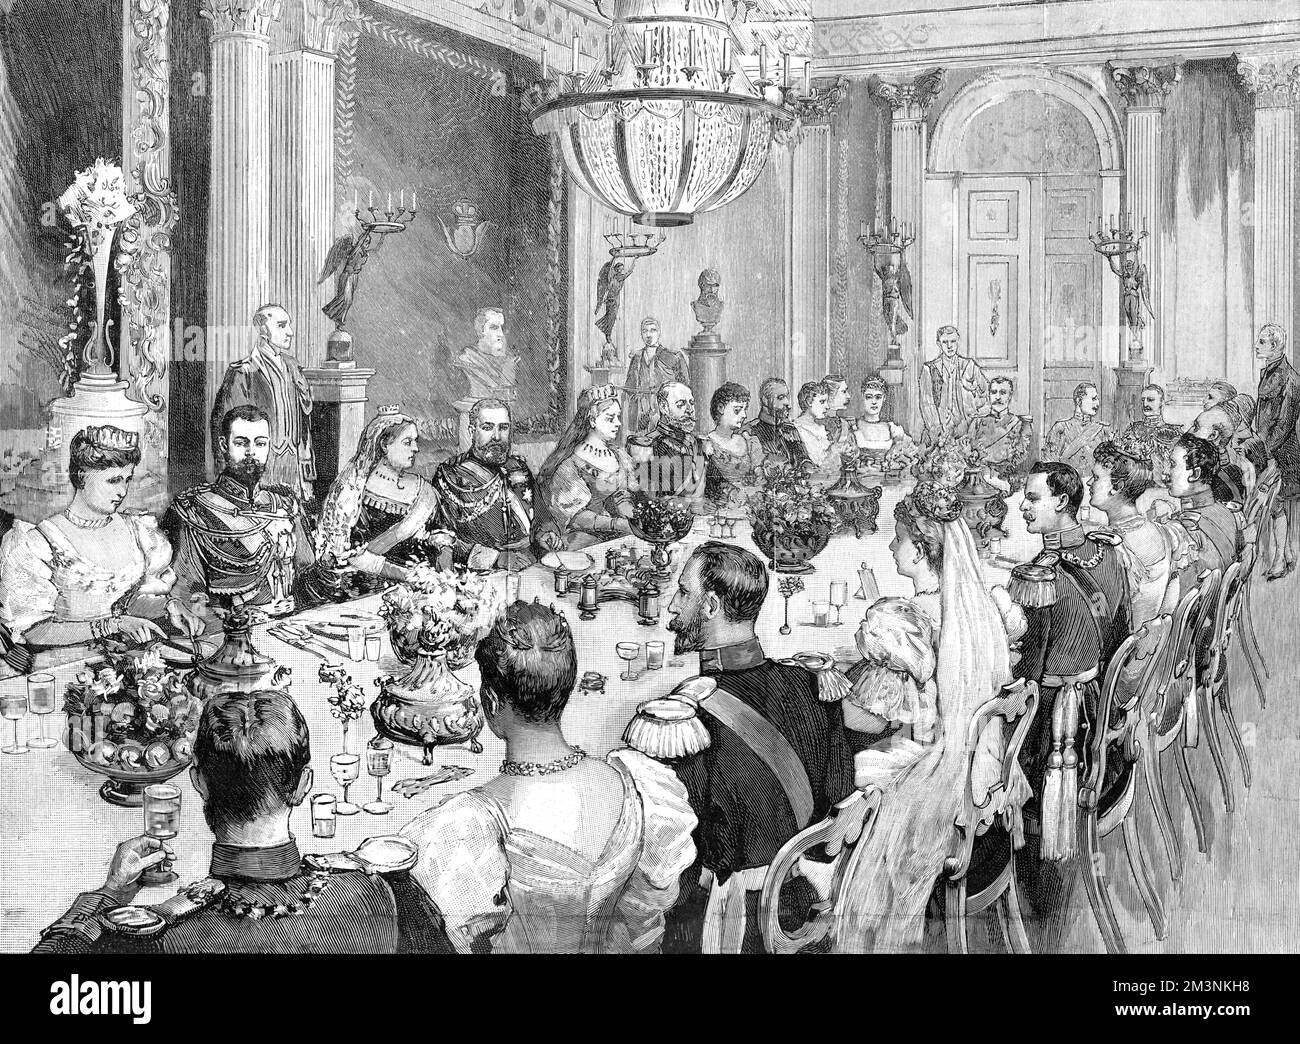 A meal in celebration of the marriage between Princess Victoria Melita of Edinburgh and Prince Ernst Ludwig, Grand Duke of Hesse. The wedding breakfast was held in the throne room of the castle of Ehrenberg, in Coburg. Princess Victoria Melita was daughter of Alfred, Duke of Edinburgh and a granddaughter of Queen Victoria as well as of Tsar Nicholas II of Russia. Her marriage to her paternal first cousin Ernst Ludwig, ended in divorce in 1901.     Date: 1894 Stock Photo